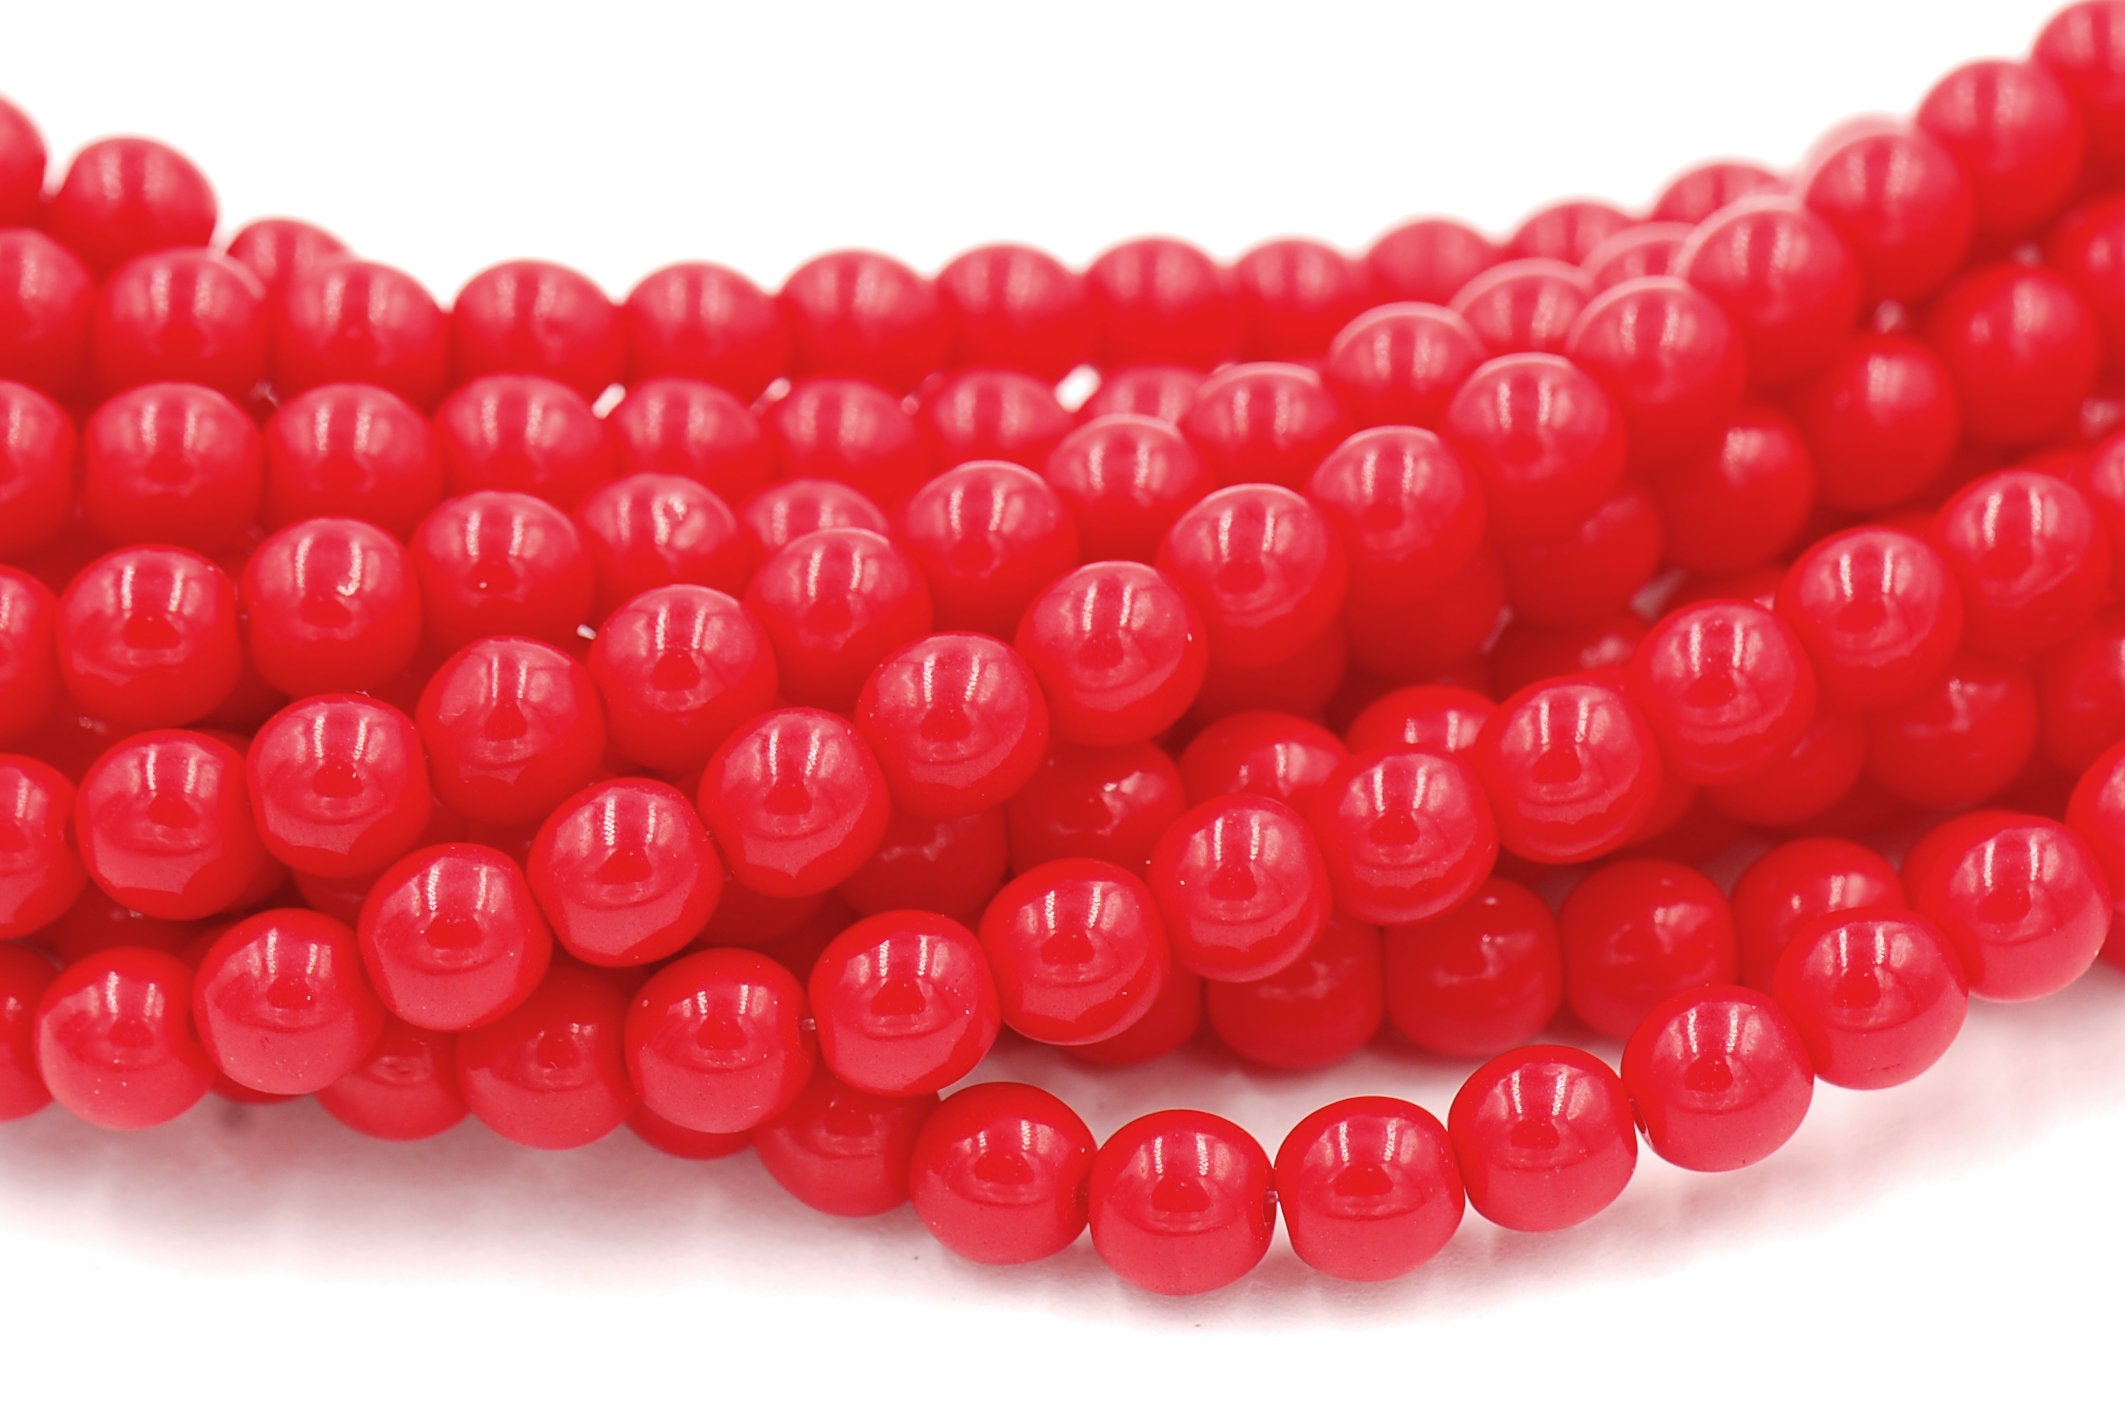 Czech Beads 6mm Fire Polished Glass Round in Opaque Red- 50 Pieces